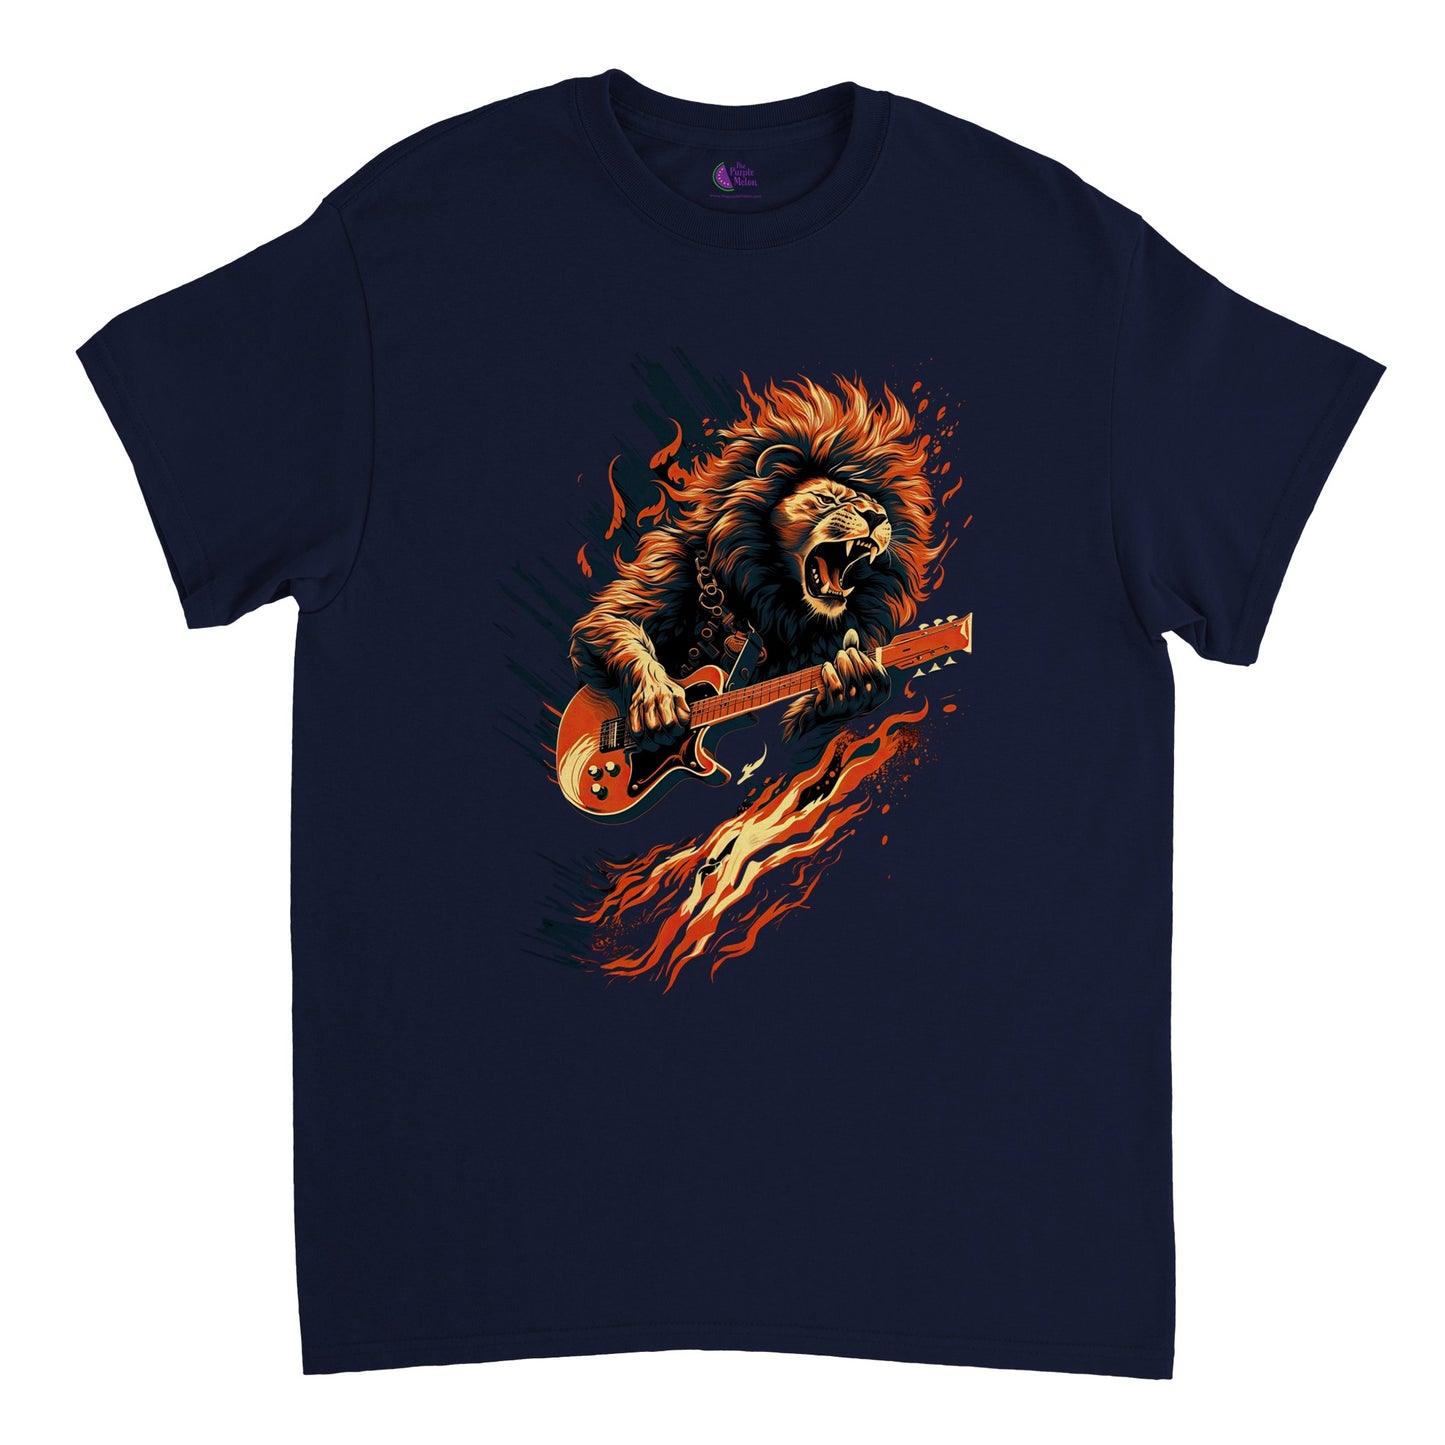 Navy blue t-shirt with flaming lion playing guitar print